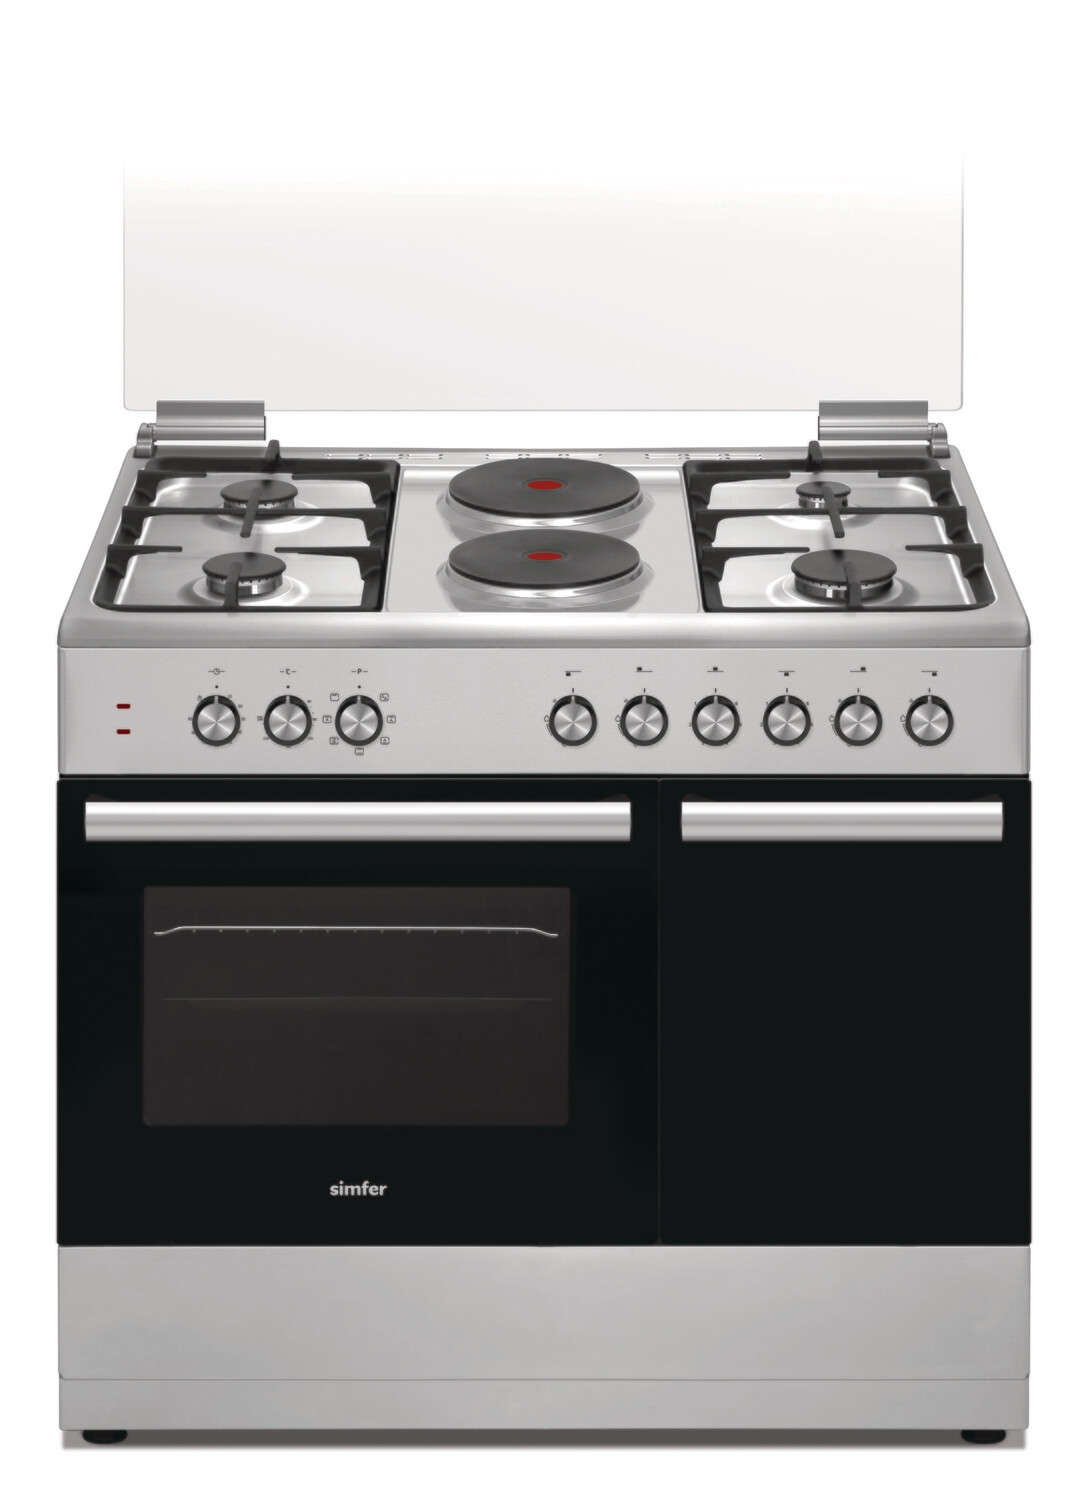 Simfer 9426SEI 4 Gas + 2 Electric Cooker - Silver - Comprehensive Cooking Solution